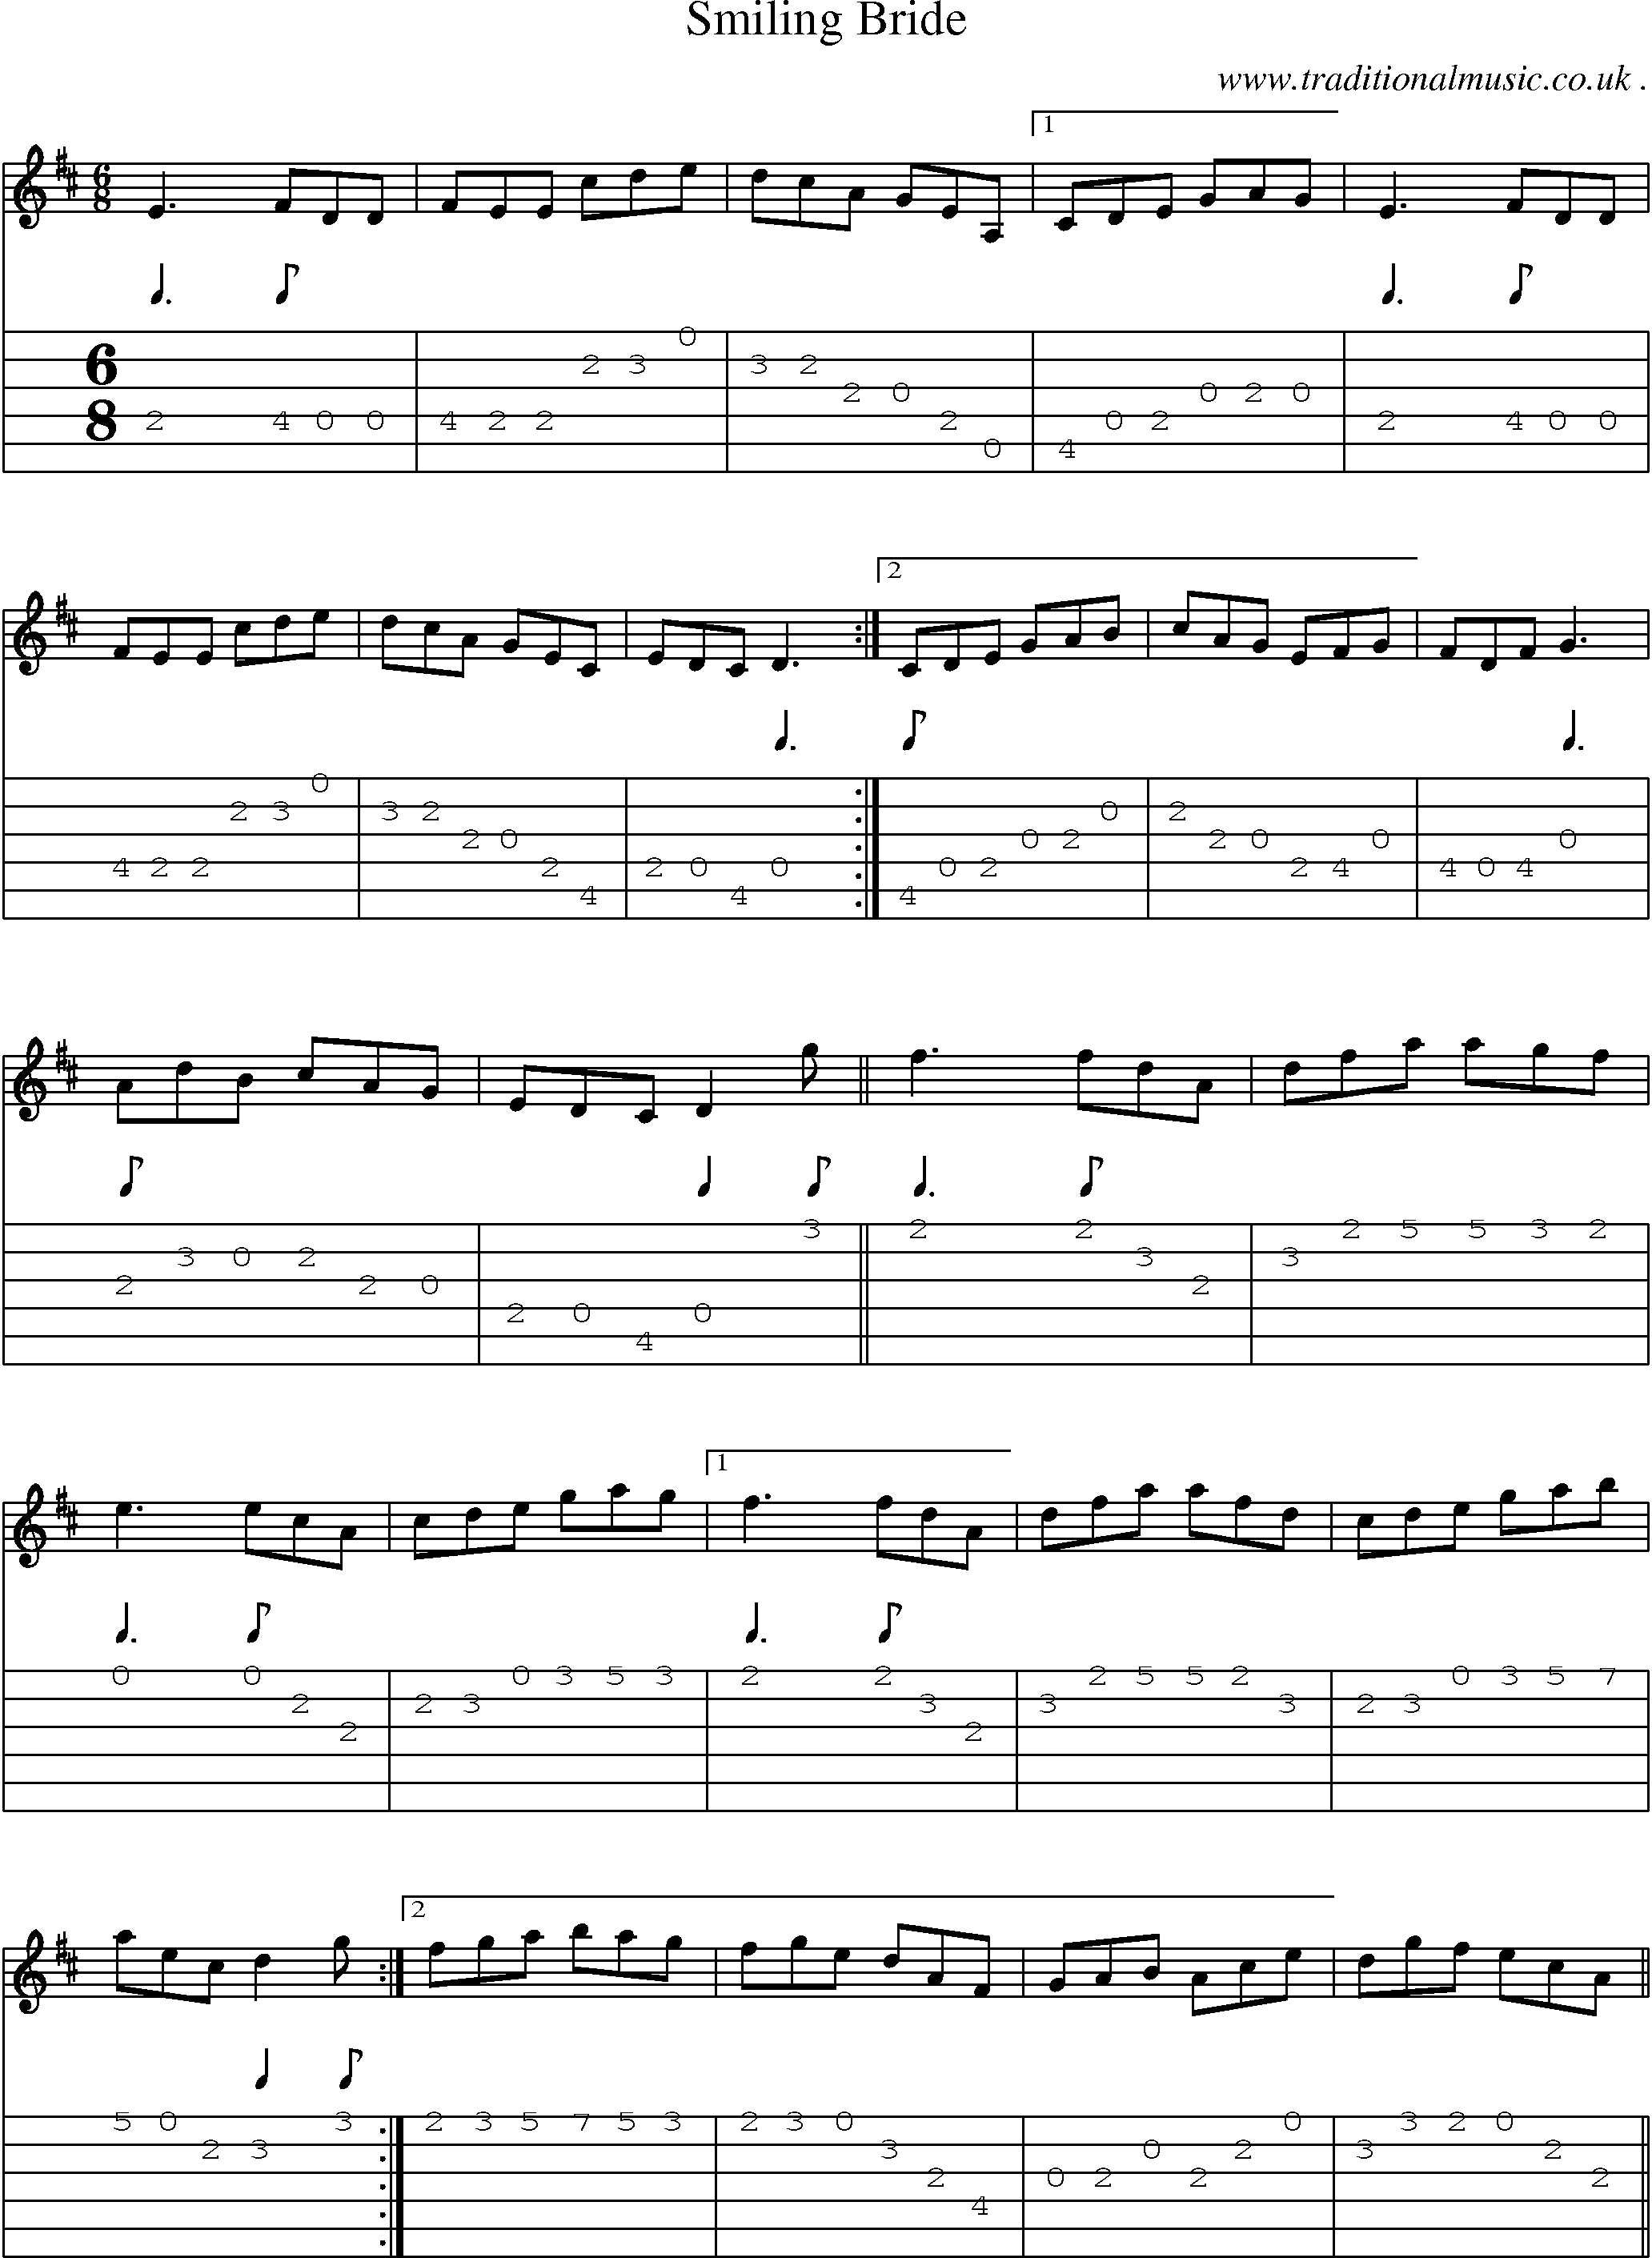 Sheet-Music and Guitar Tabs for Smiling Bride